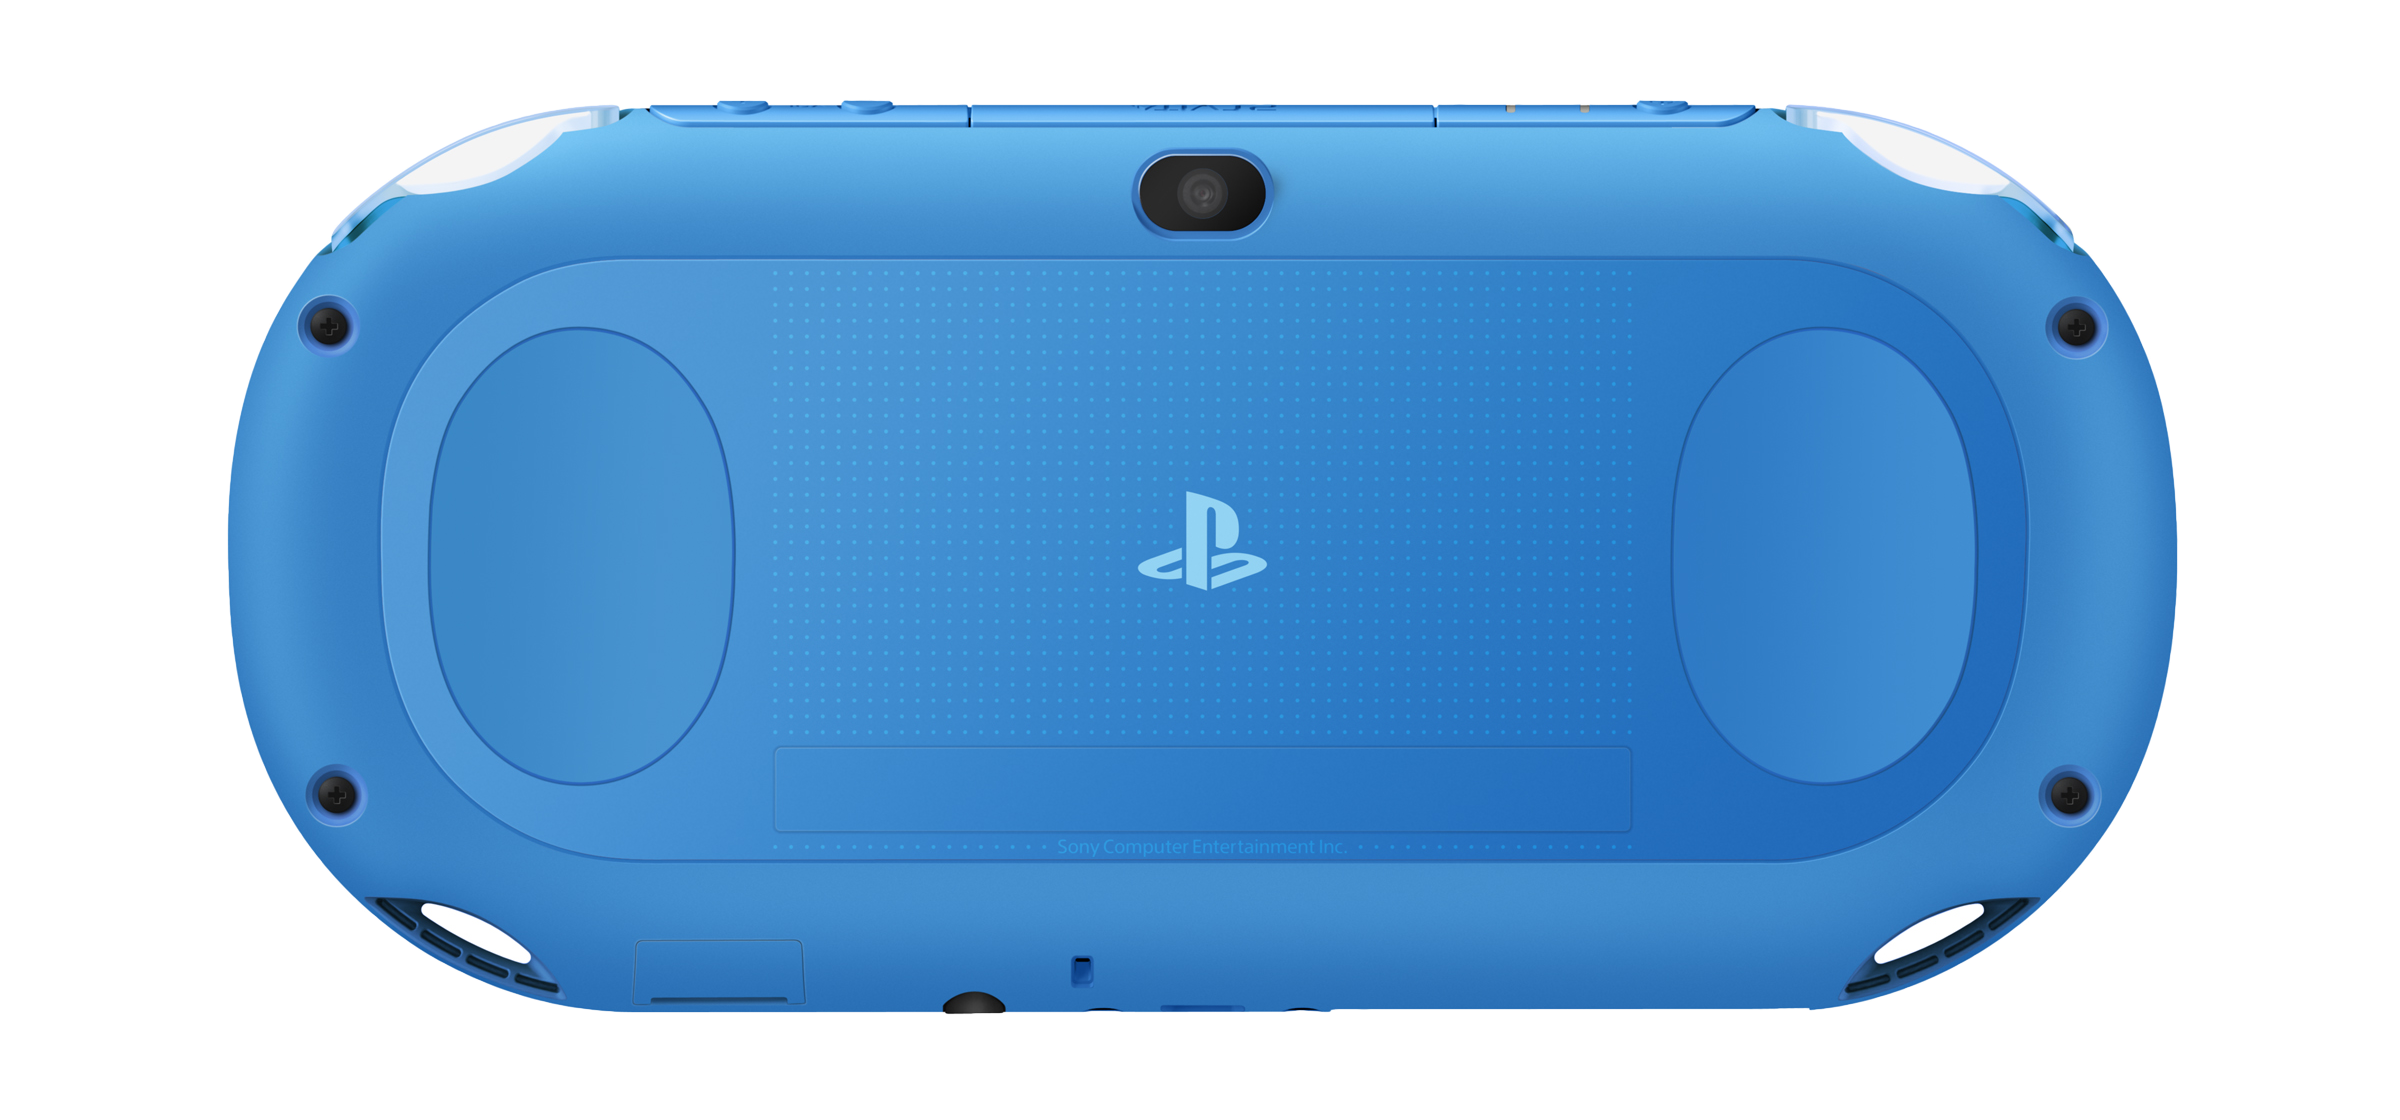 The back of the PS Vita